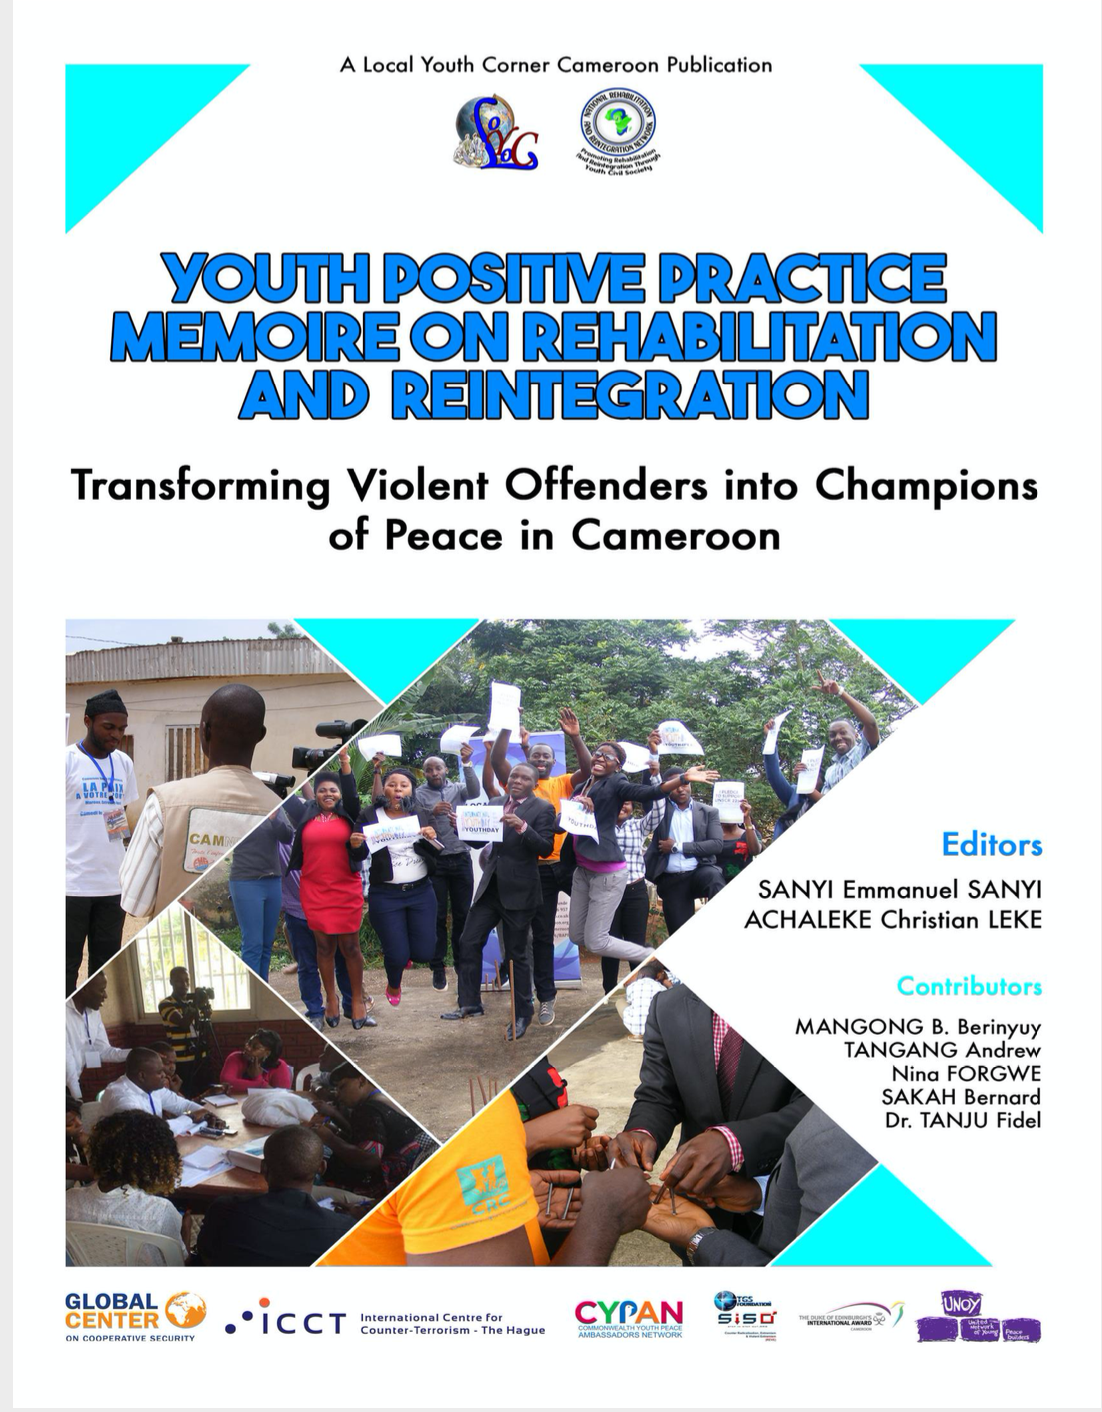 ’Youth Positive Practice Memoire on Rehabilitation and Reintegration in Cameroon: Transforming Violent Offenders into Champions of Peace.